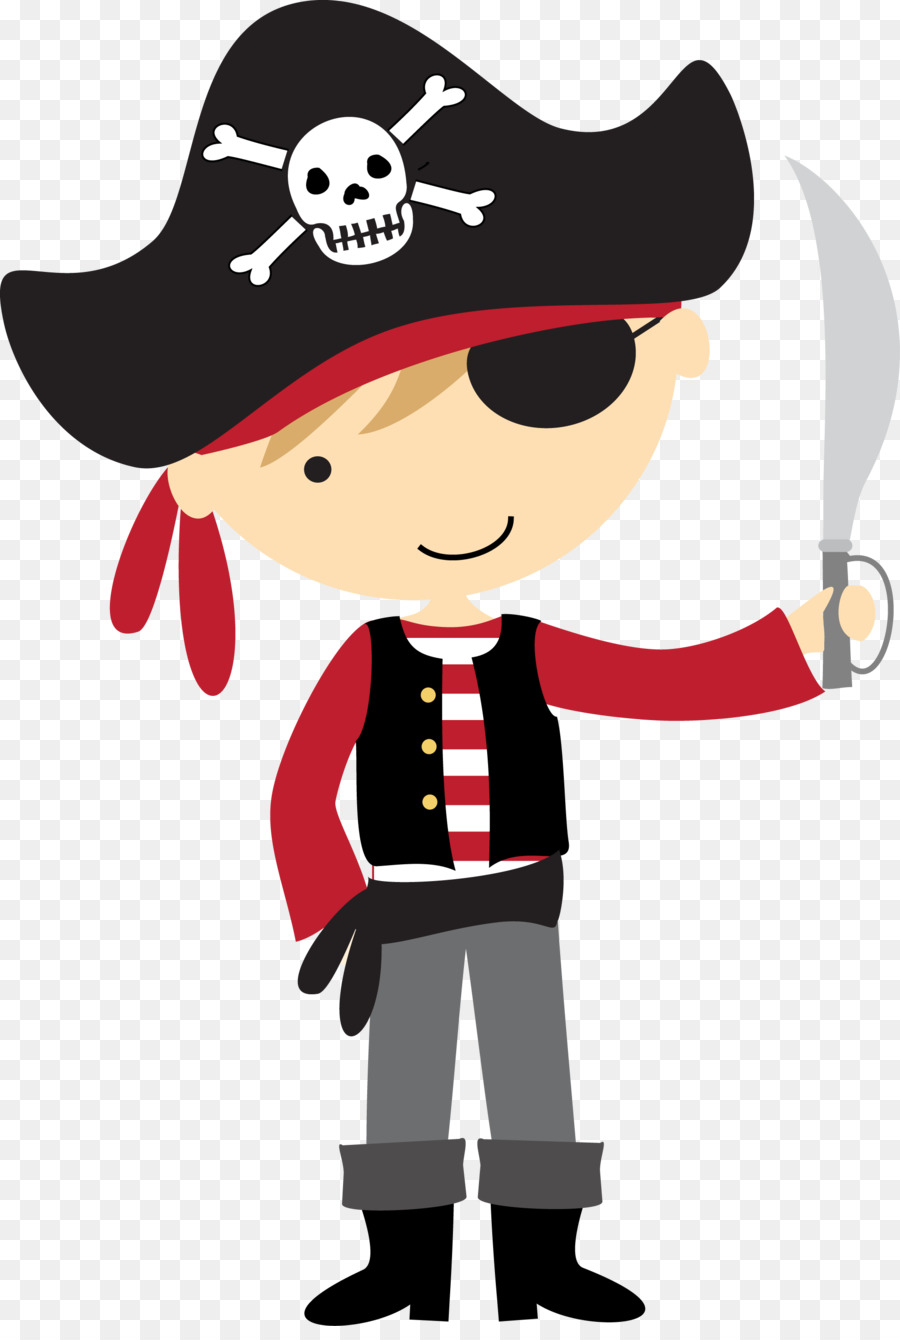 Piracy Pirate Party Clip art - pirate silhouette png download - 1973*2906 - Free Transparent Piracy png Download.